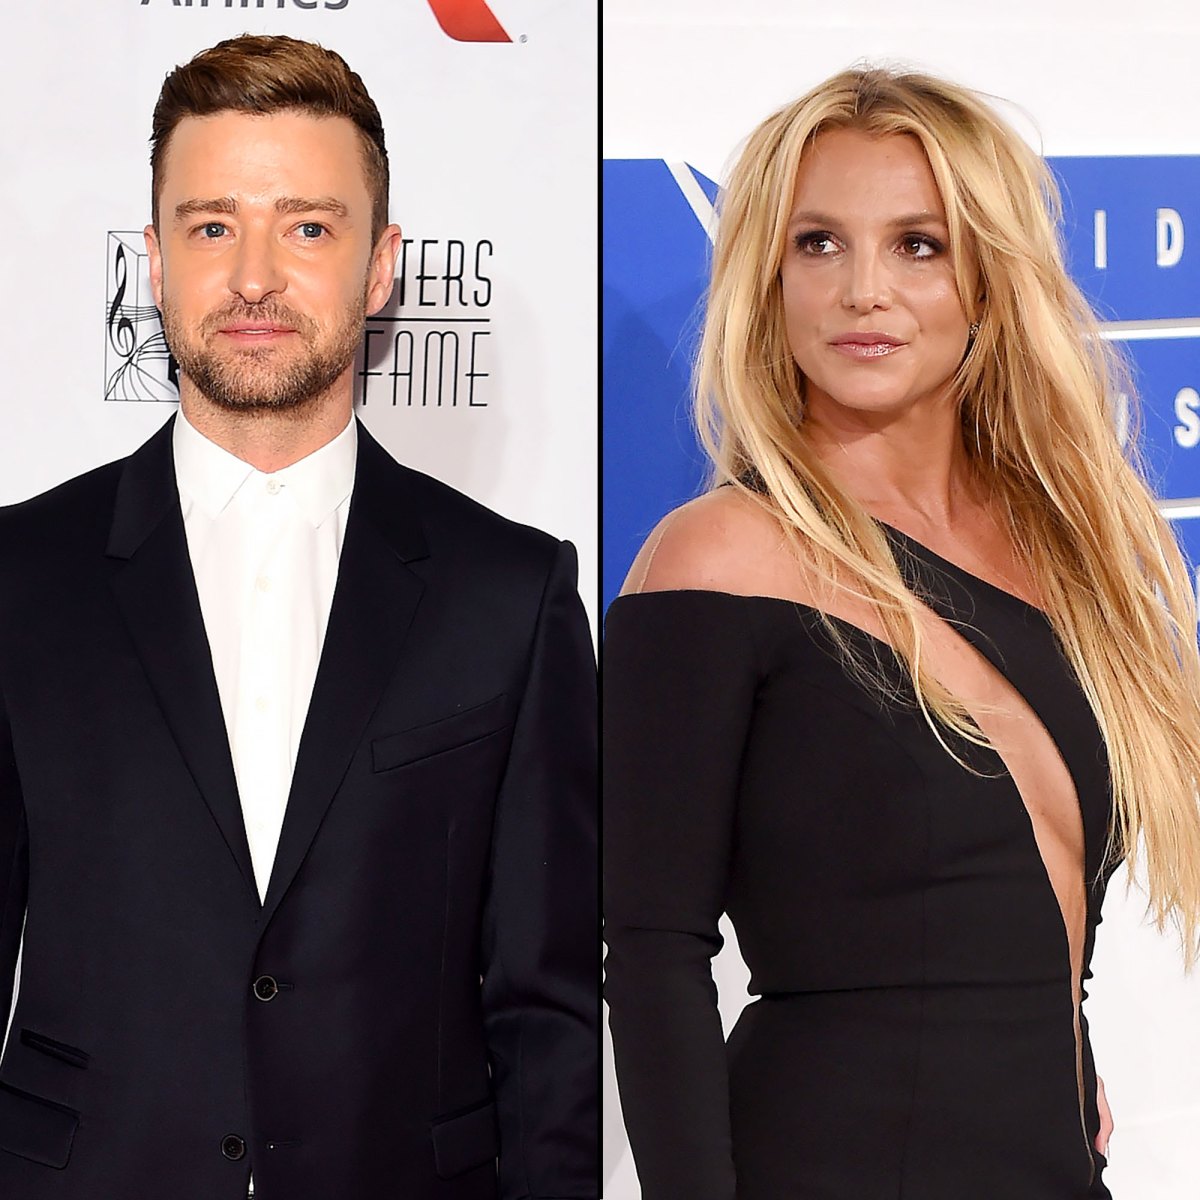 Justin Timberlake Broke Up With Britney Spears Via Text: Book